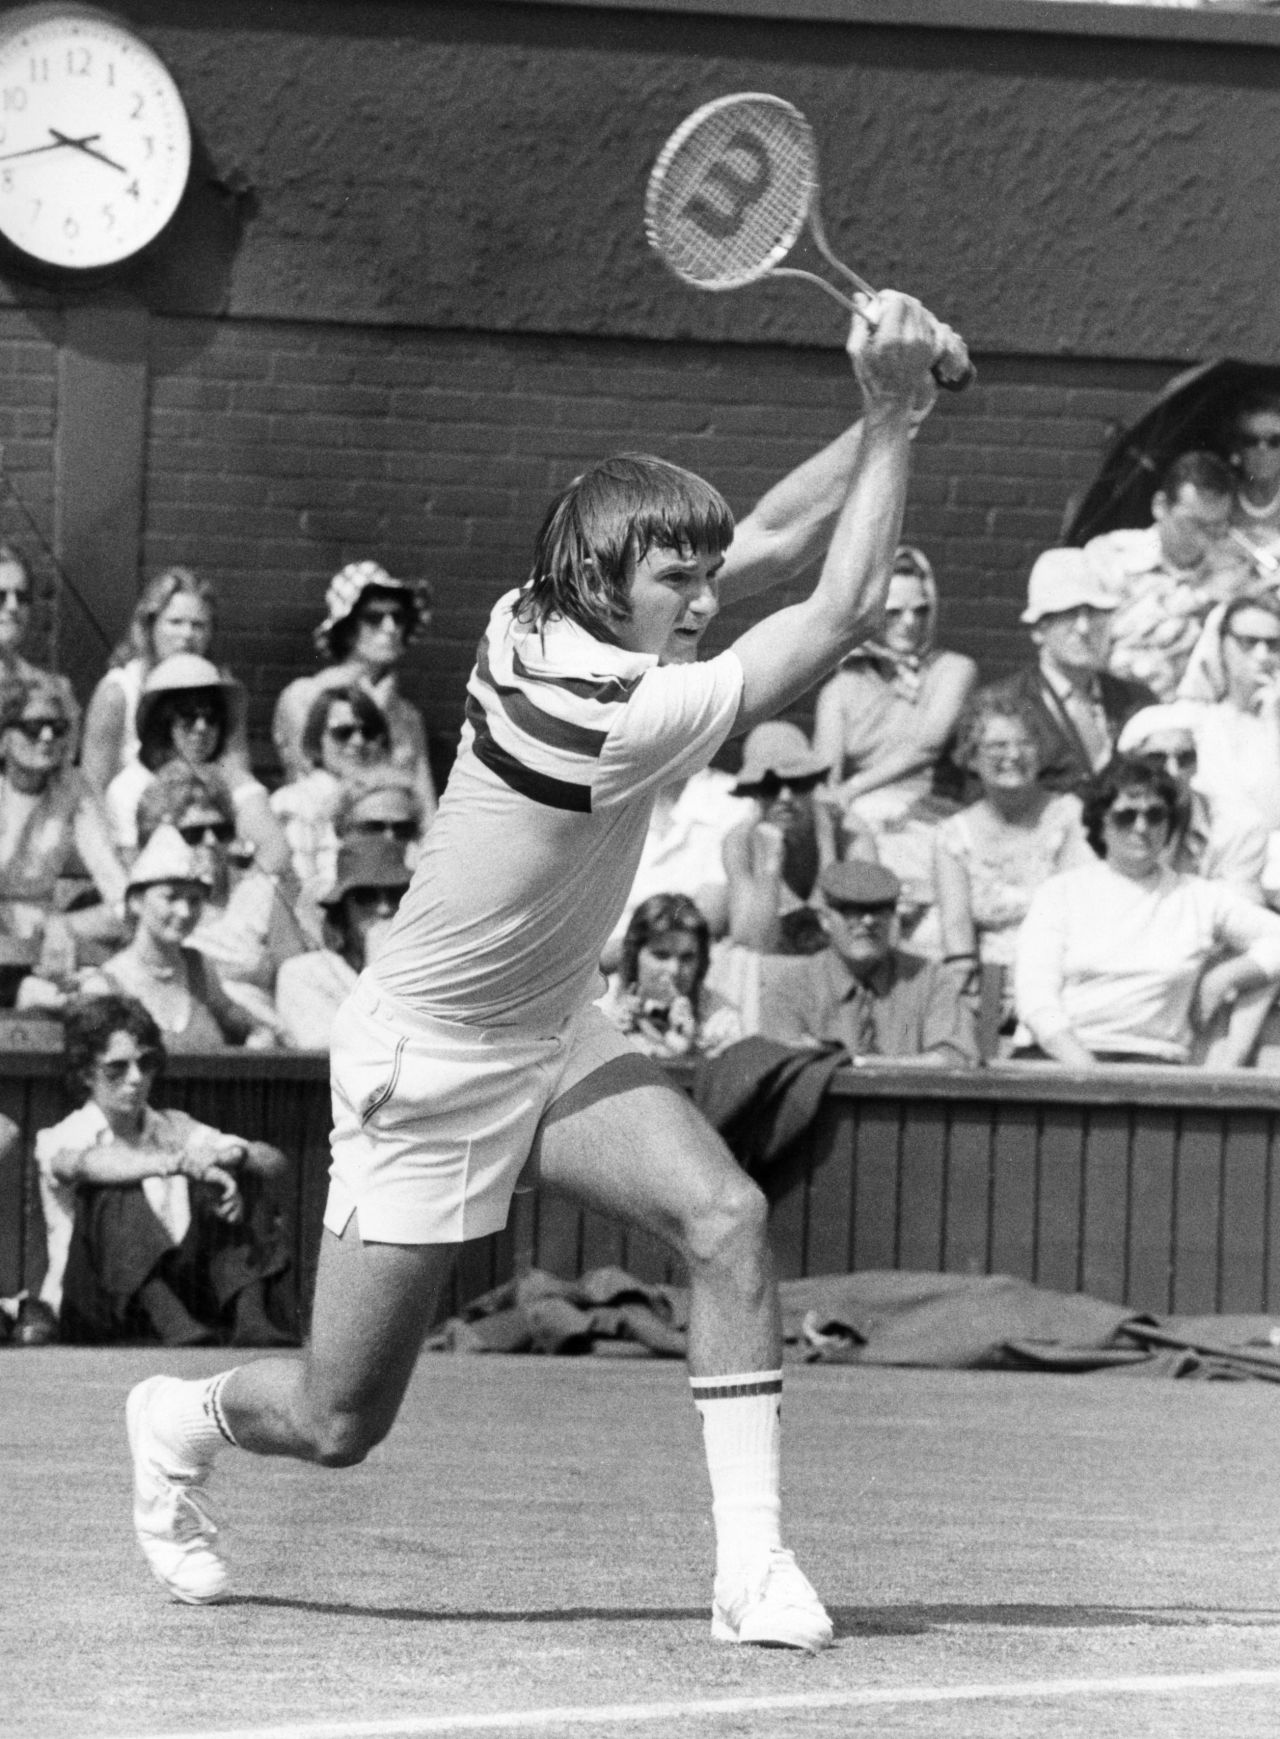 Jimmy Connors is fourth on the list with 268 weeks. The American is the only male to have won more than 100 singles titles, while he has also reached more grand slam quarterfinals (41) than any other player. The eight-time major champion was also the first man to spend a total of five years in the No. 1 spot.